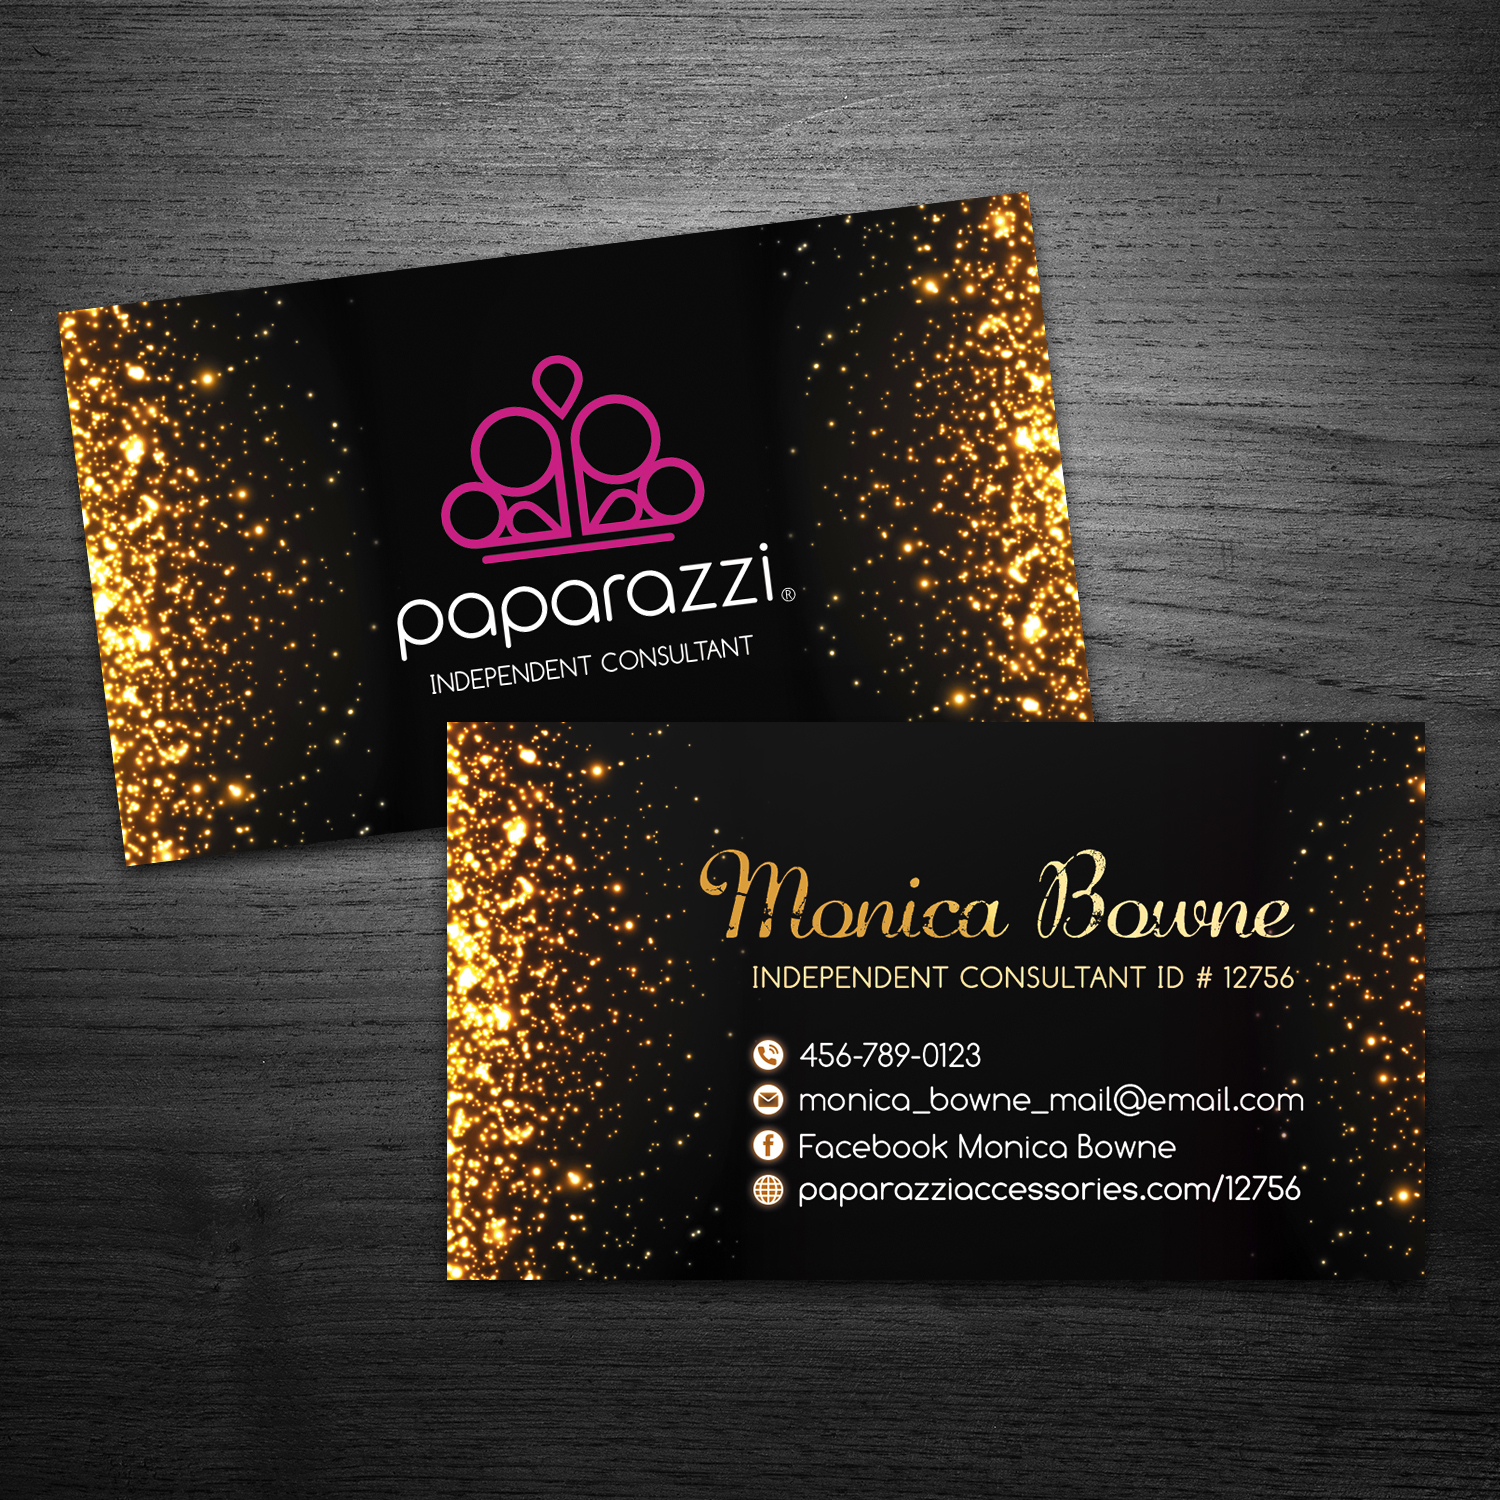 Paparazzi Business Card #4G For Paparazzi Accessories business - VicProDigital